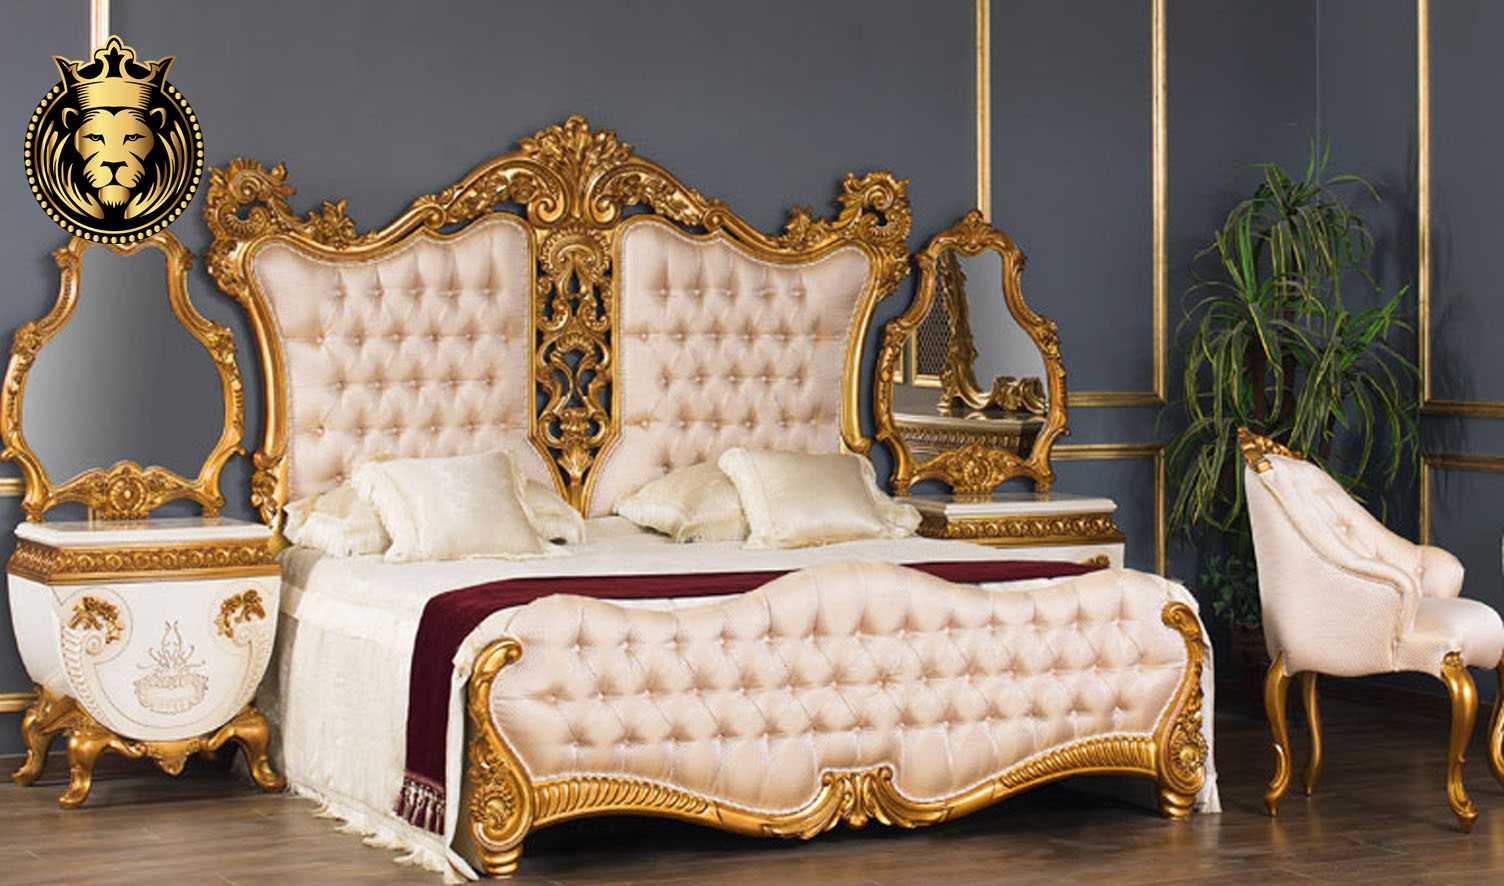 Luxury Bed Set- Wood Carving Classic Italian Design in Gold Leaf Gilding Finish - Hand Carved By Brand Royalzig Luxury Furniture